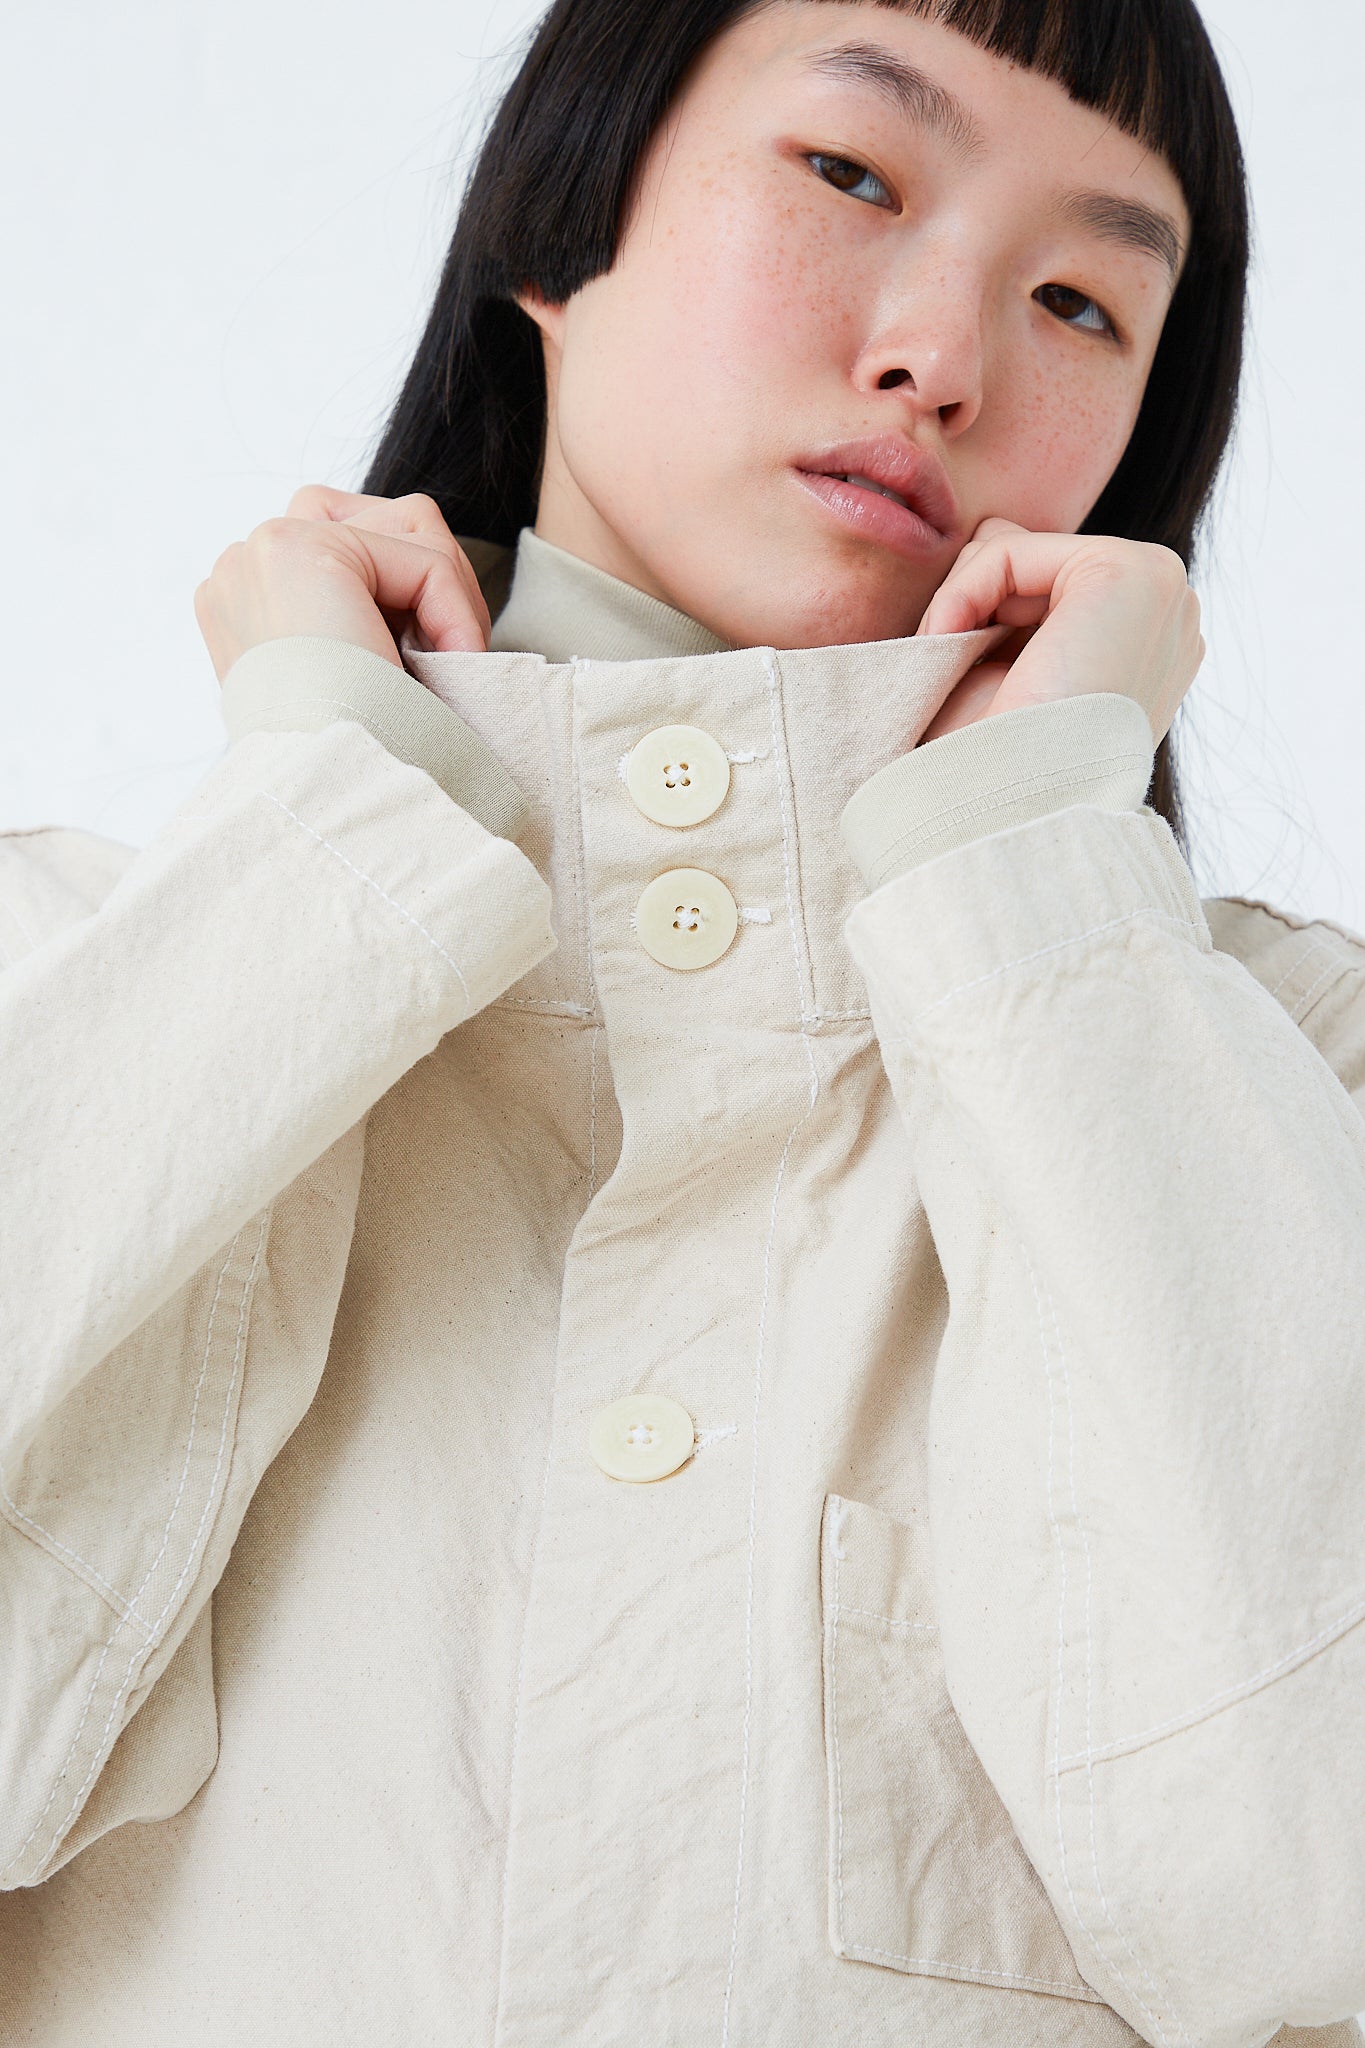 A woman wearing a Jesse Kamm Organic Canvas Deck Jacket in Natural made of organic cotton.